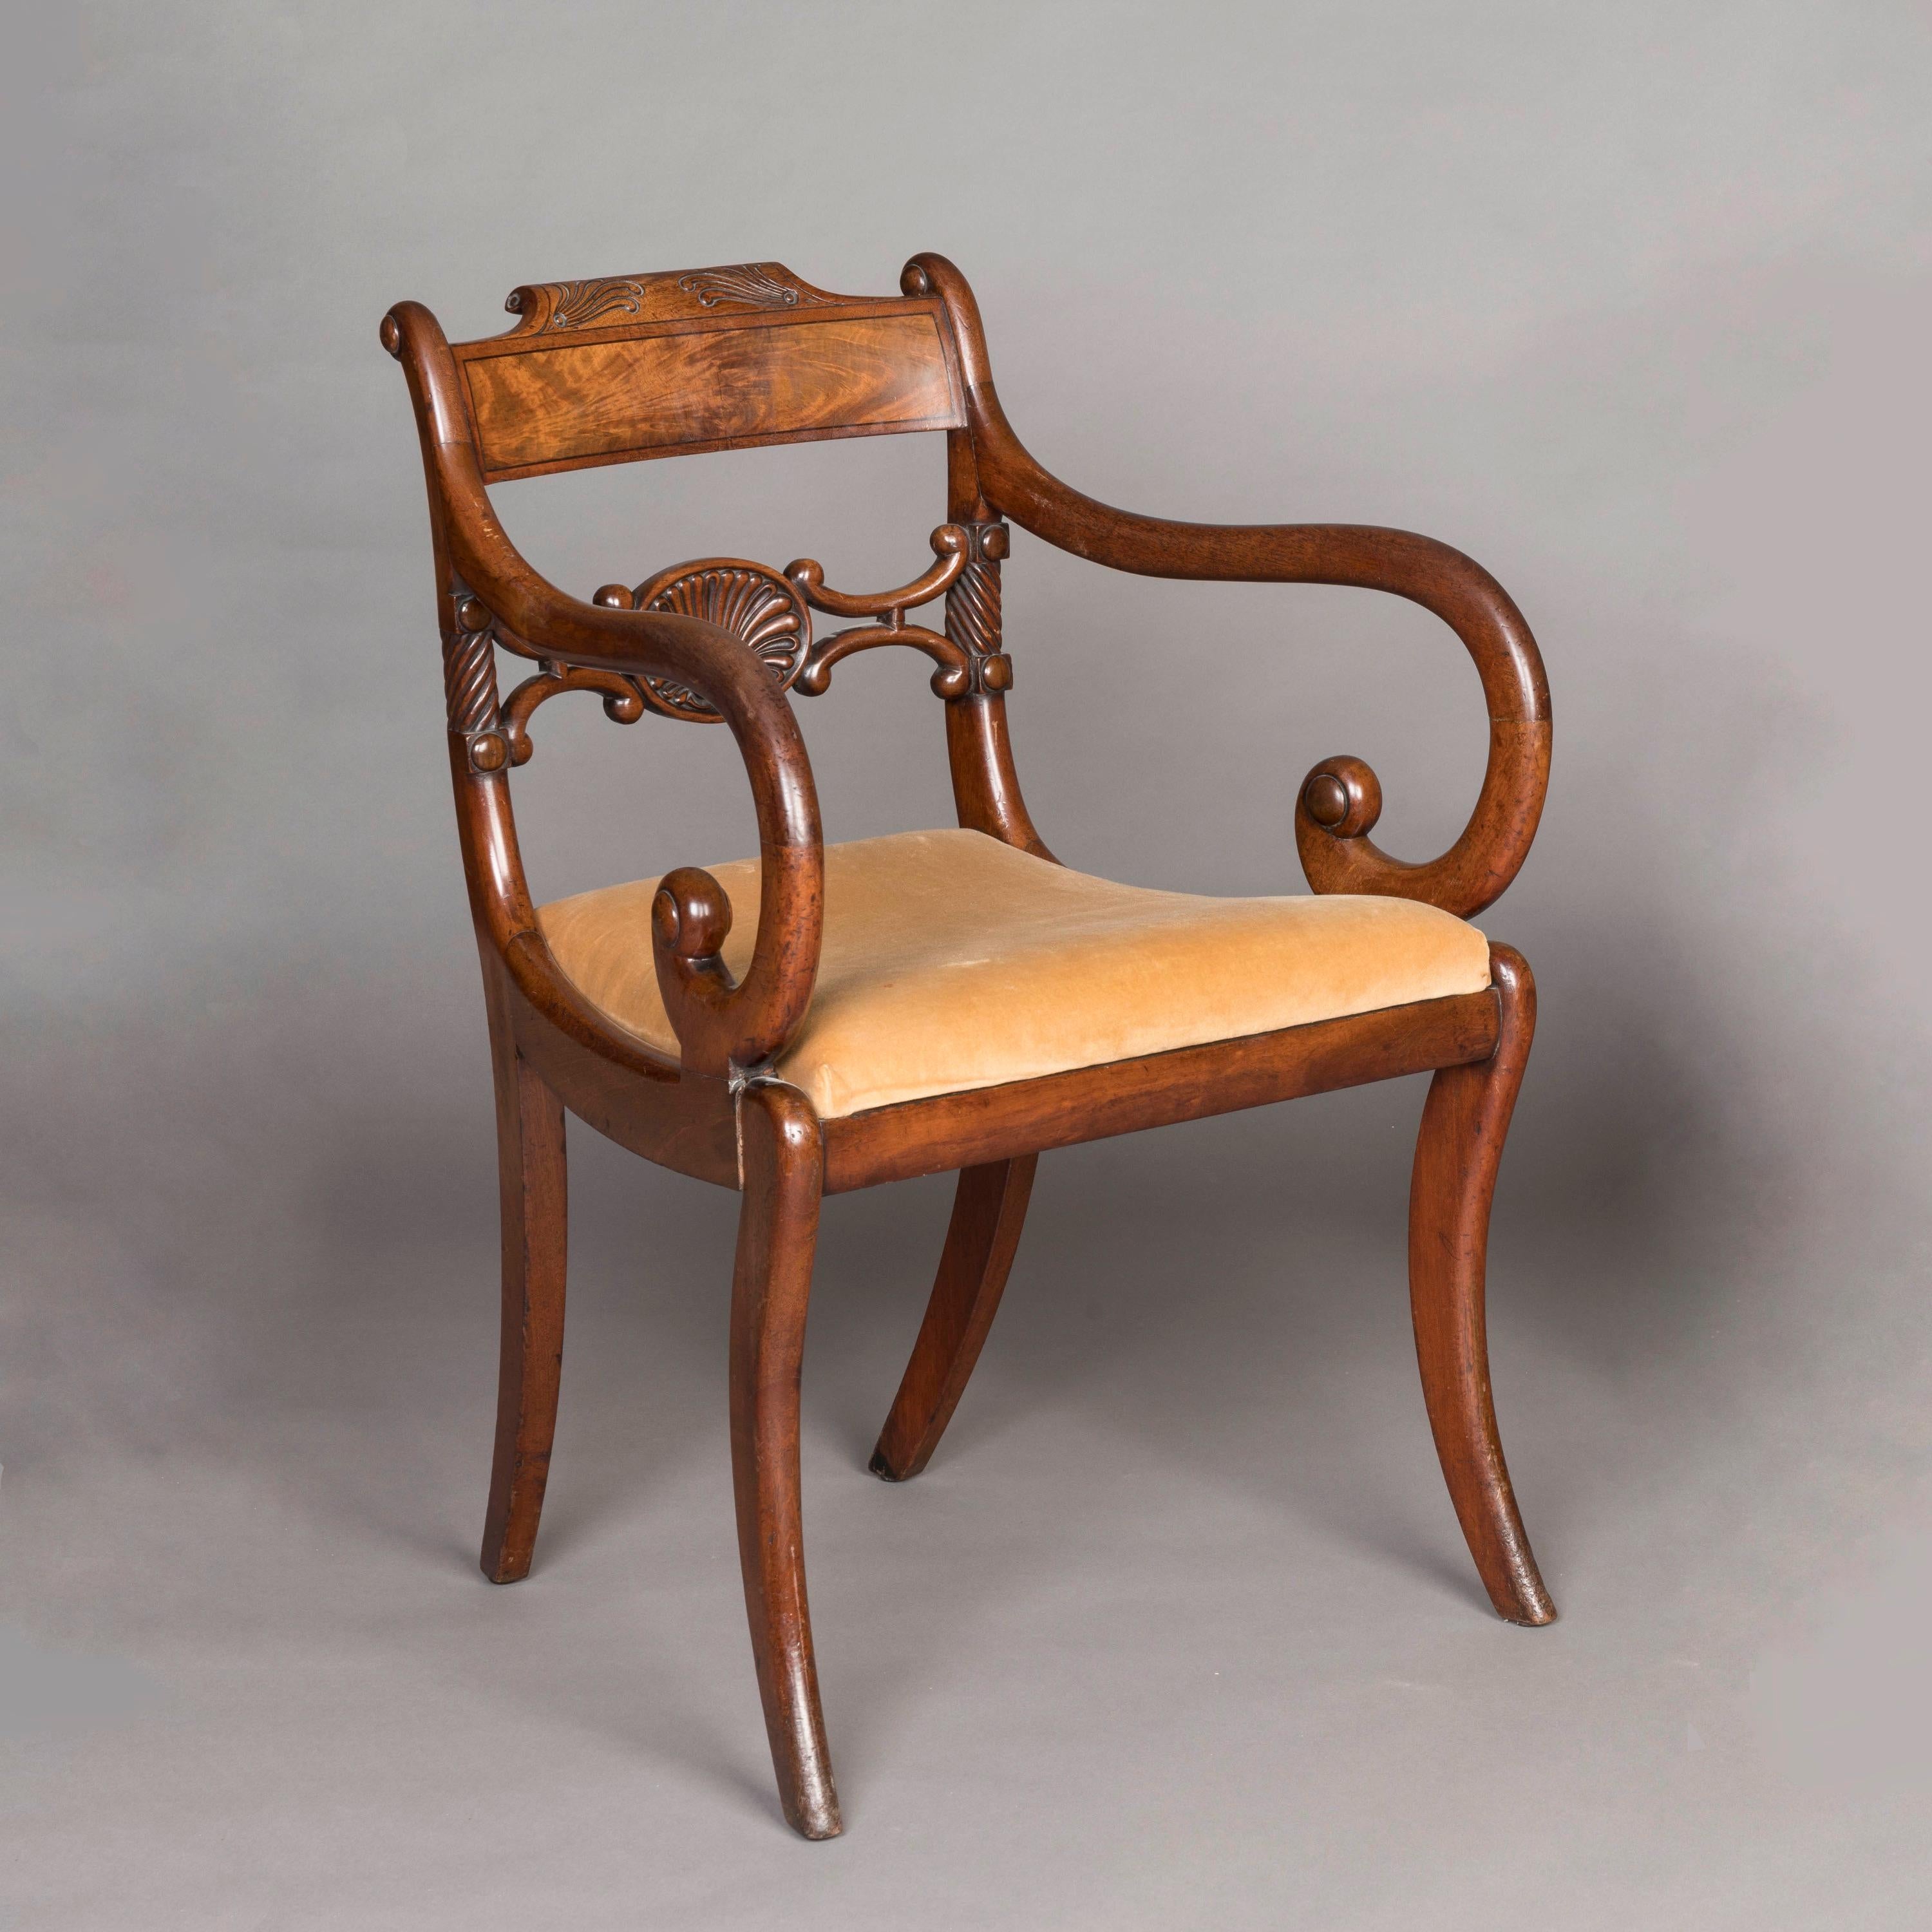 Hand-Carved Early 19th Century English Regency Period Carved Mahogany Armchairs  For Sale